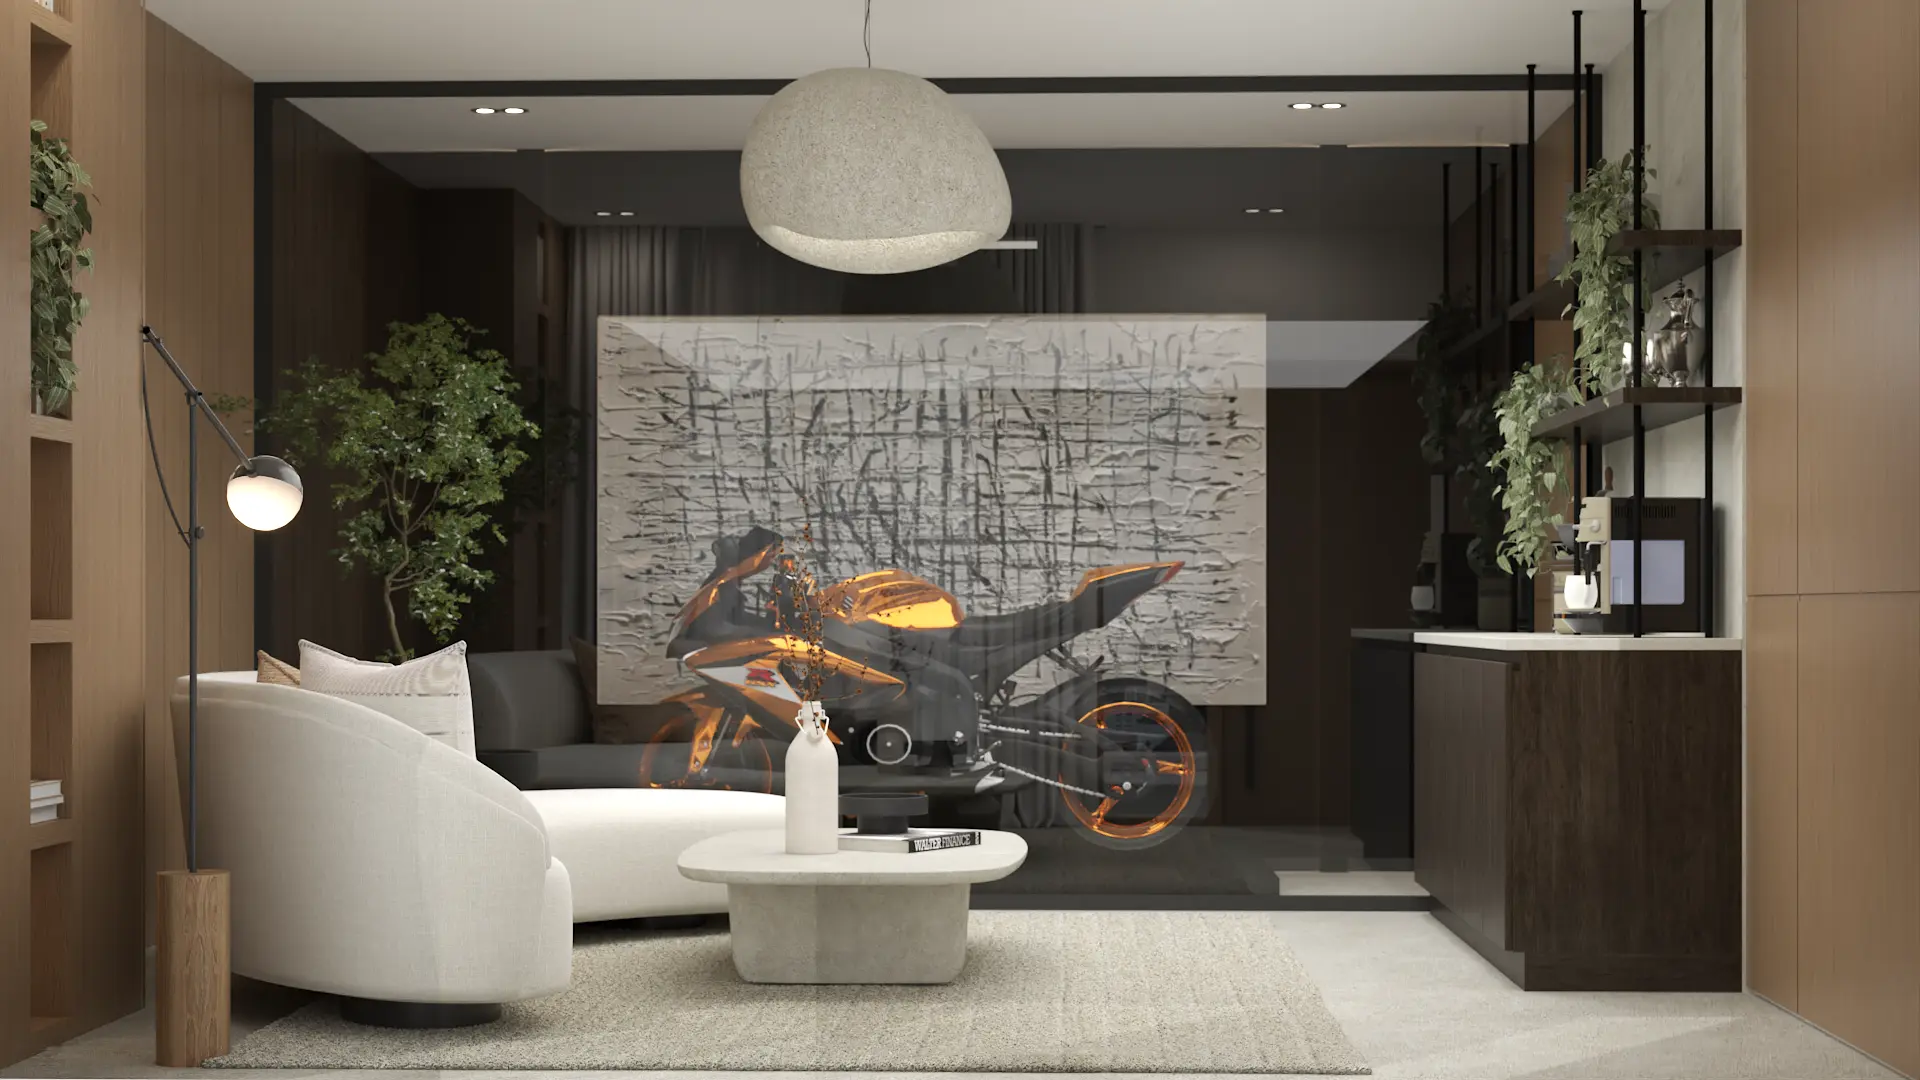 A modern living room with a unique motorcycle display, comfortable seating, and lush green plants. The design combines contemporary decor with industrial touches, creating a visually interesting and inviting space. Design by Debora, an online interior design service.